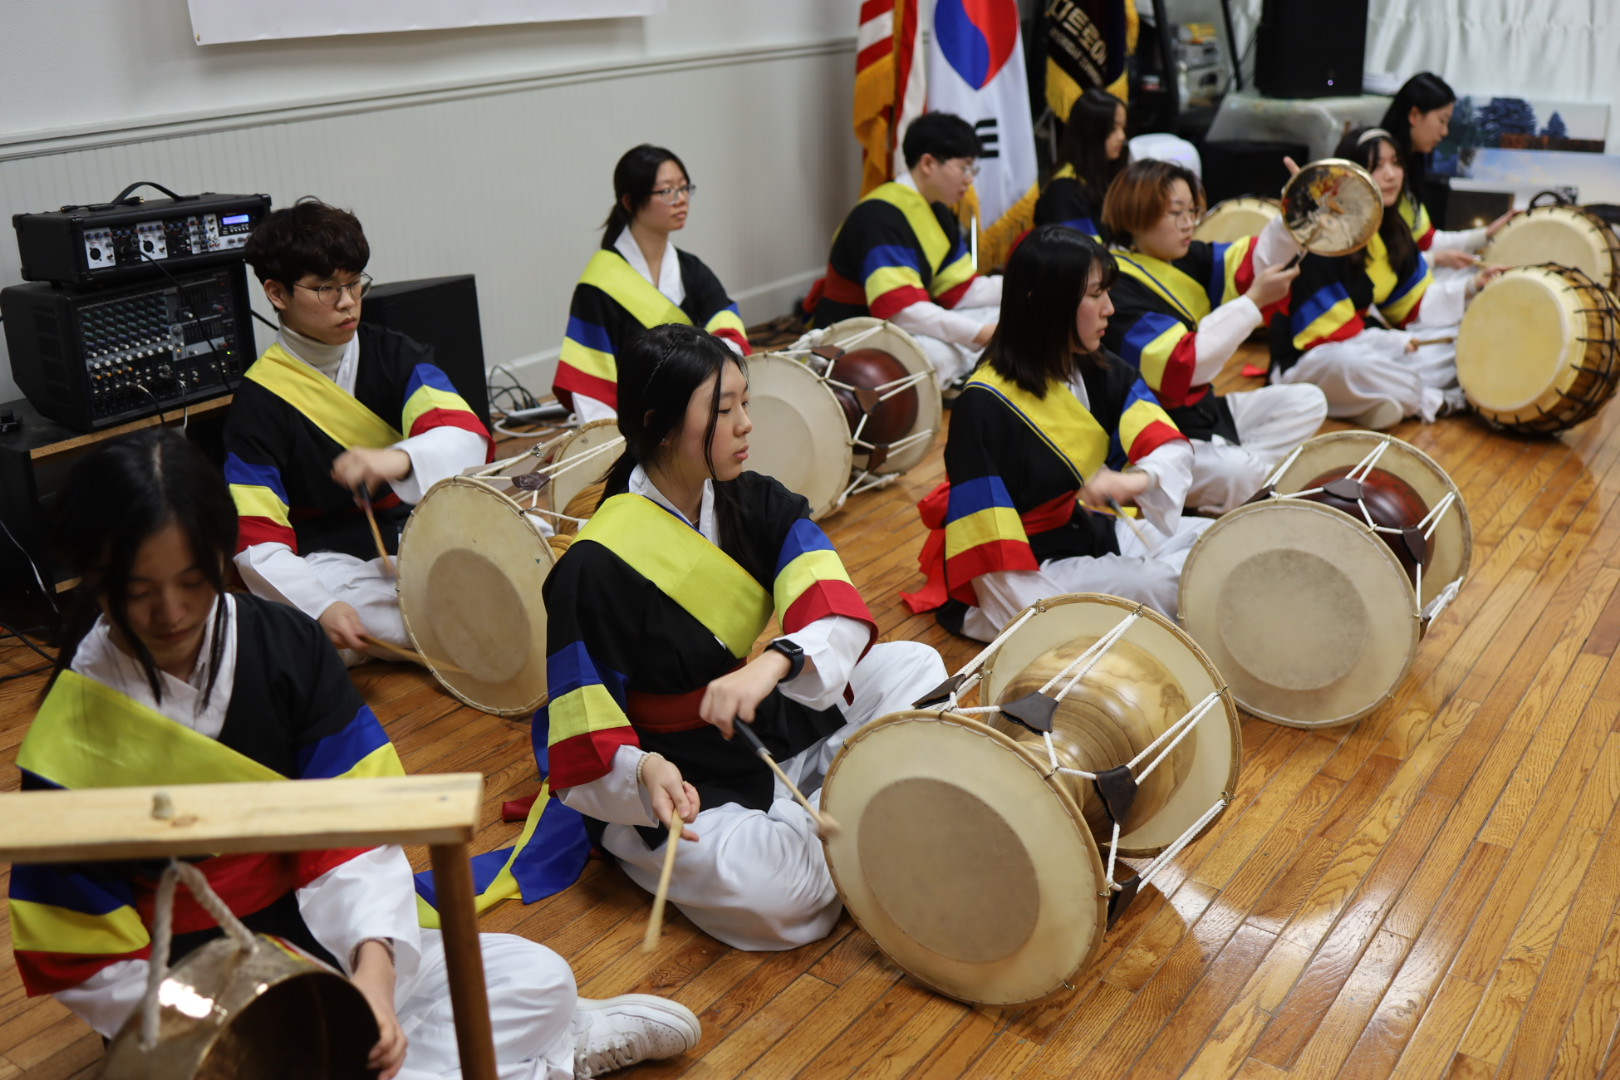 Woorisori, a traditional Korean percussion band composed of students, performs at the outset of the event commemorating the March 1 Independence Movement